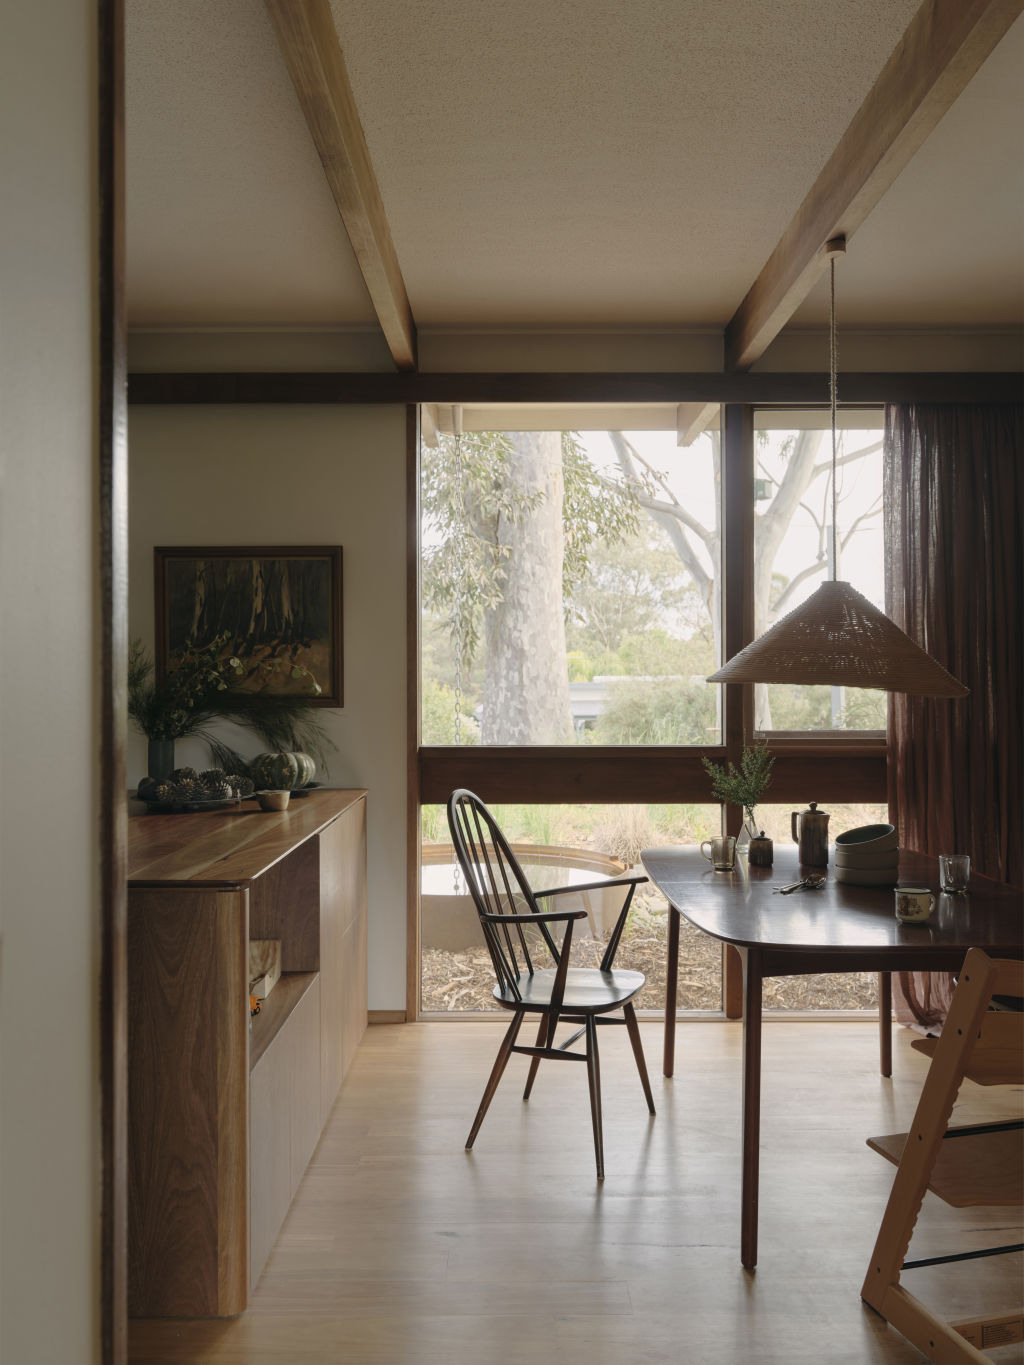 Reviving the richness of the original timber was a big ambition. Photo: Tom Ross & Pier Carthew